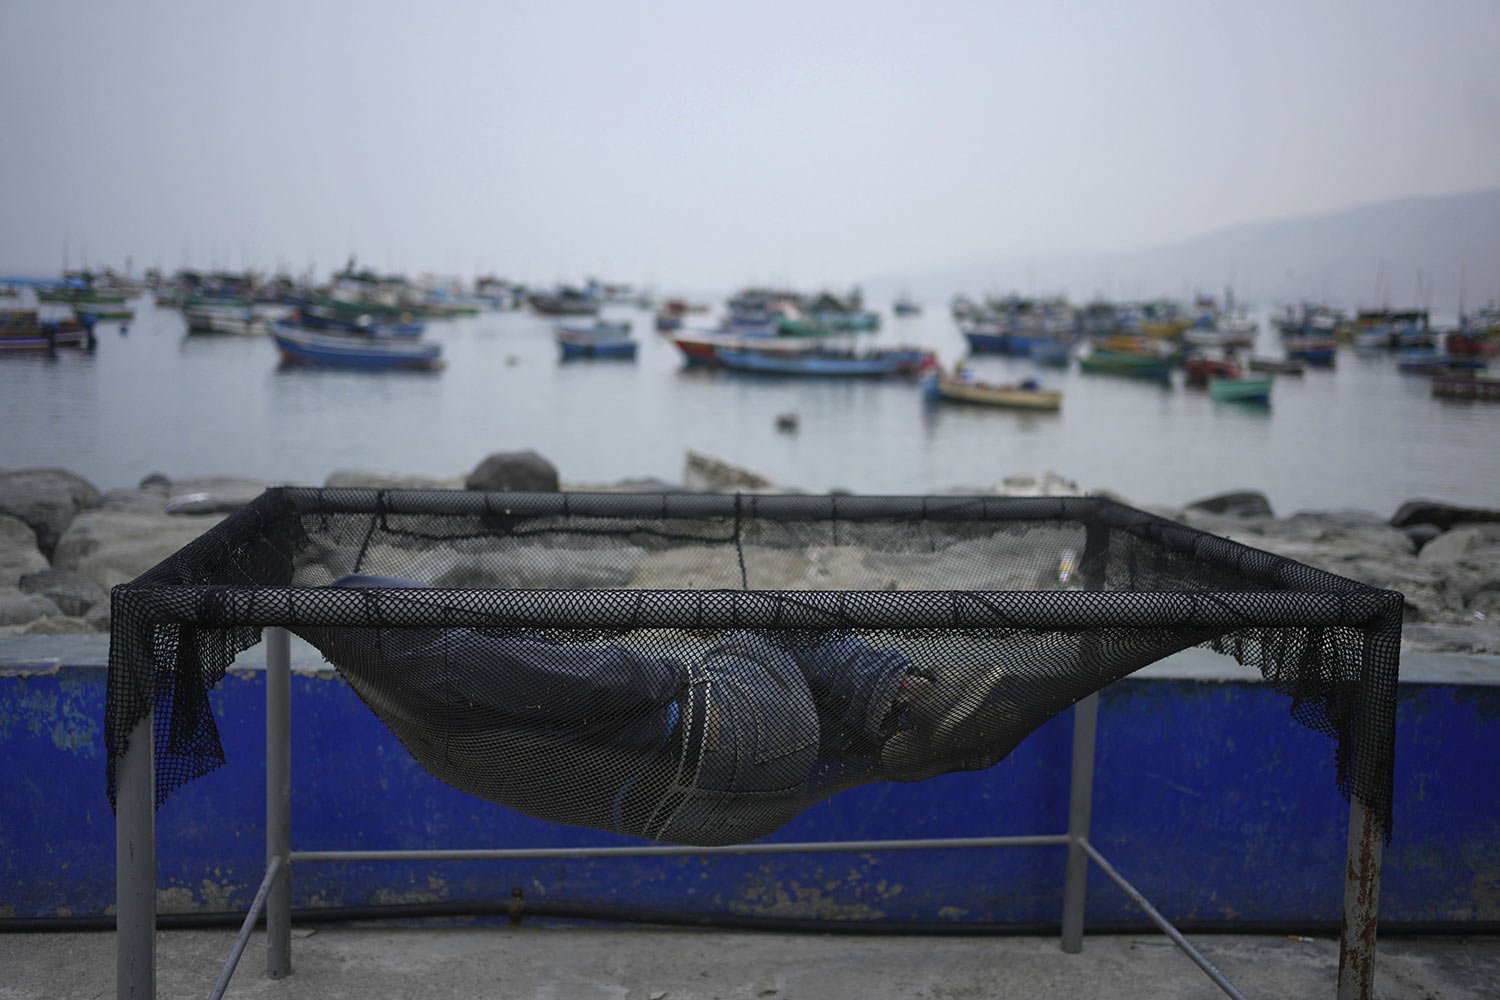  A fisherman sleeps in a net used to wash fish at the harbor of Ancon, Peru, early April 11, 2023. (AP Photo/Martin Mejia) 